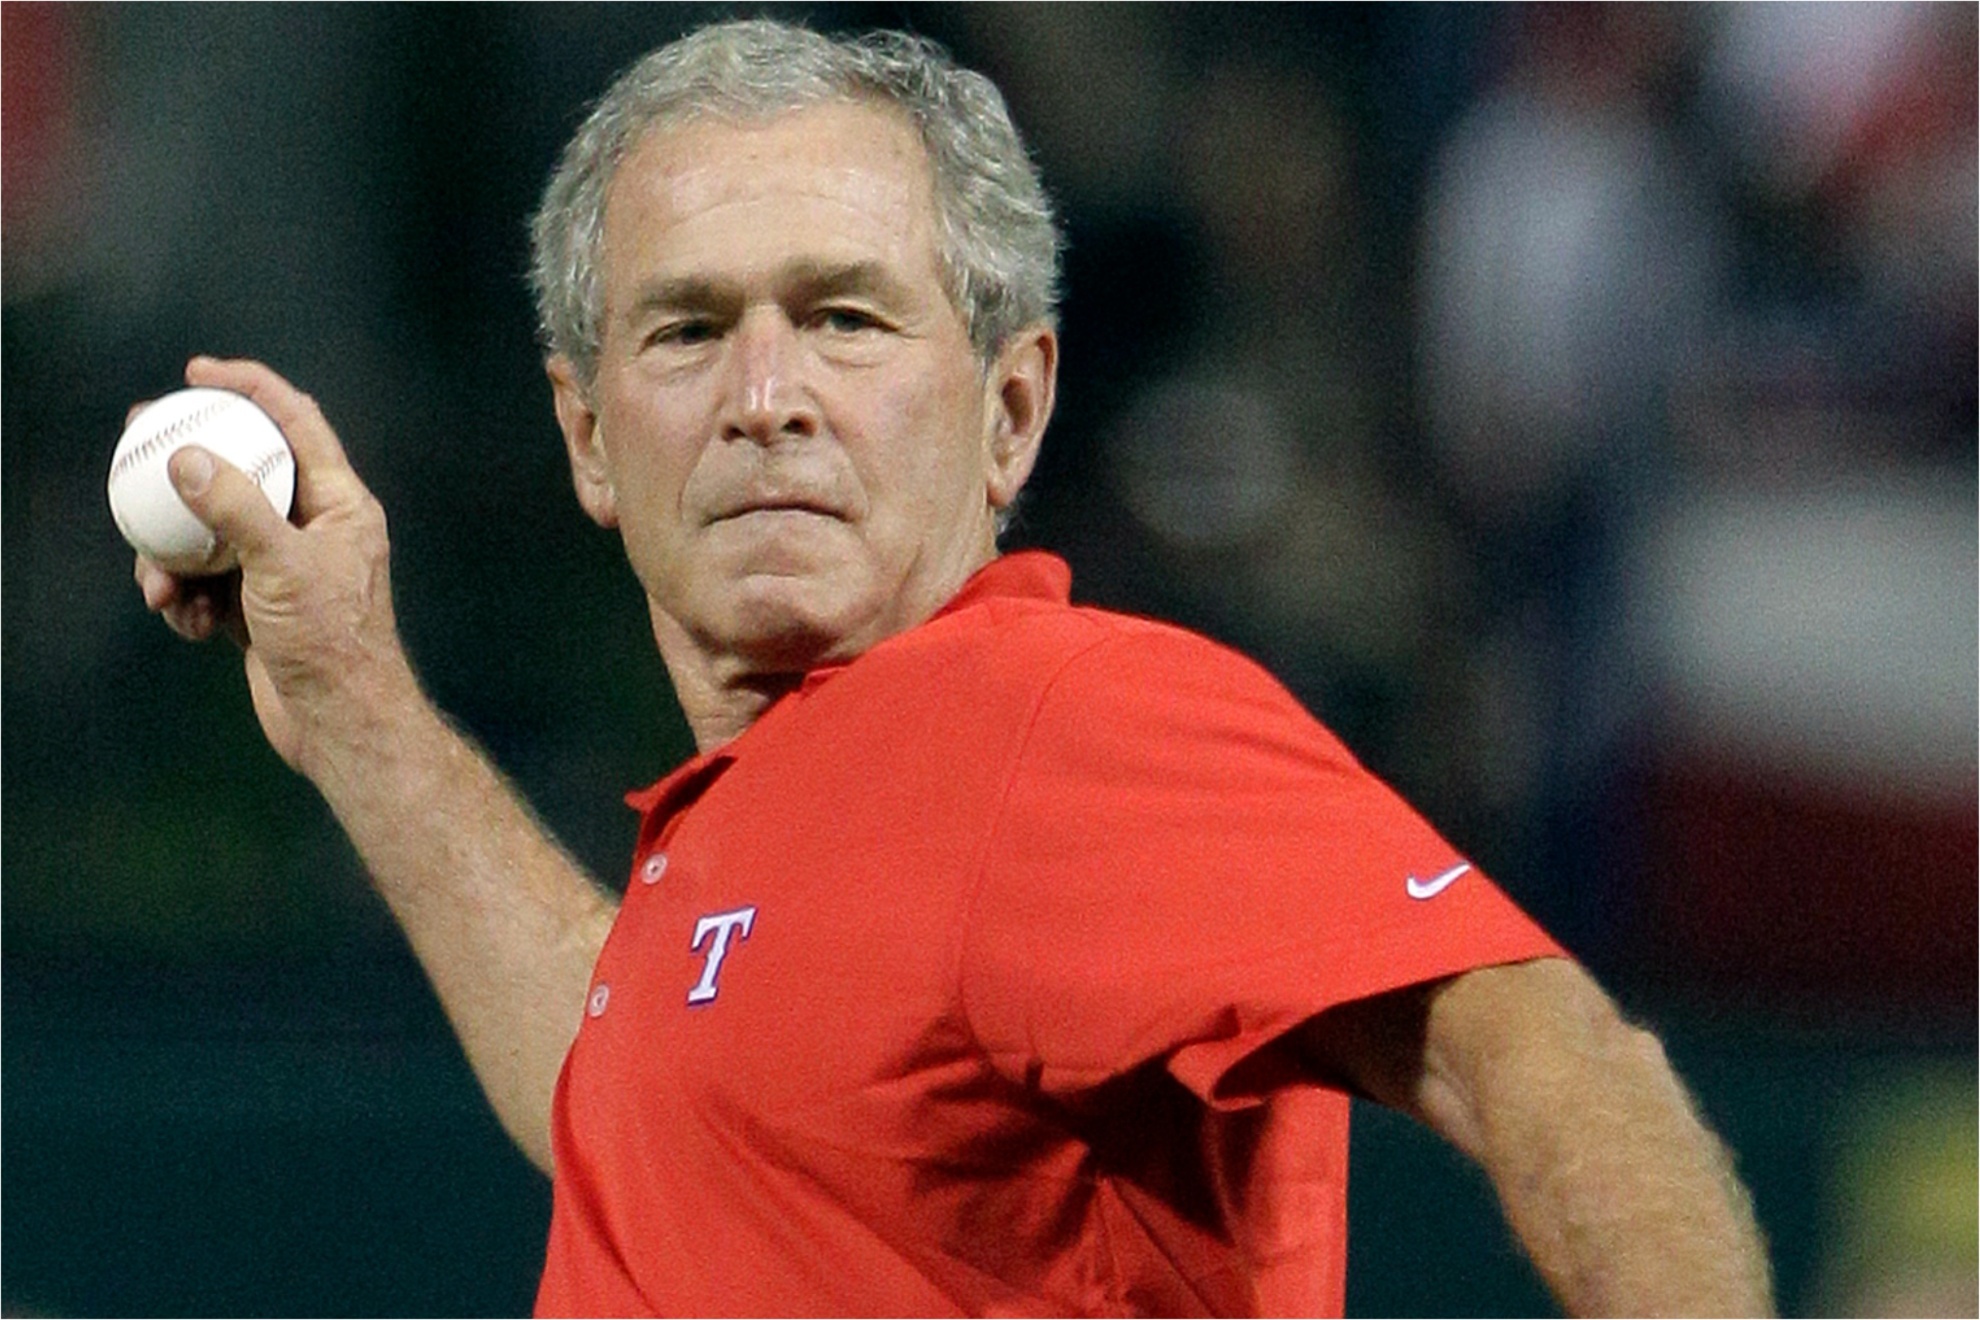 Former President George W. Bush throws out the ceremonial first pitch before Game 4 of 2011 World Series.